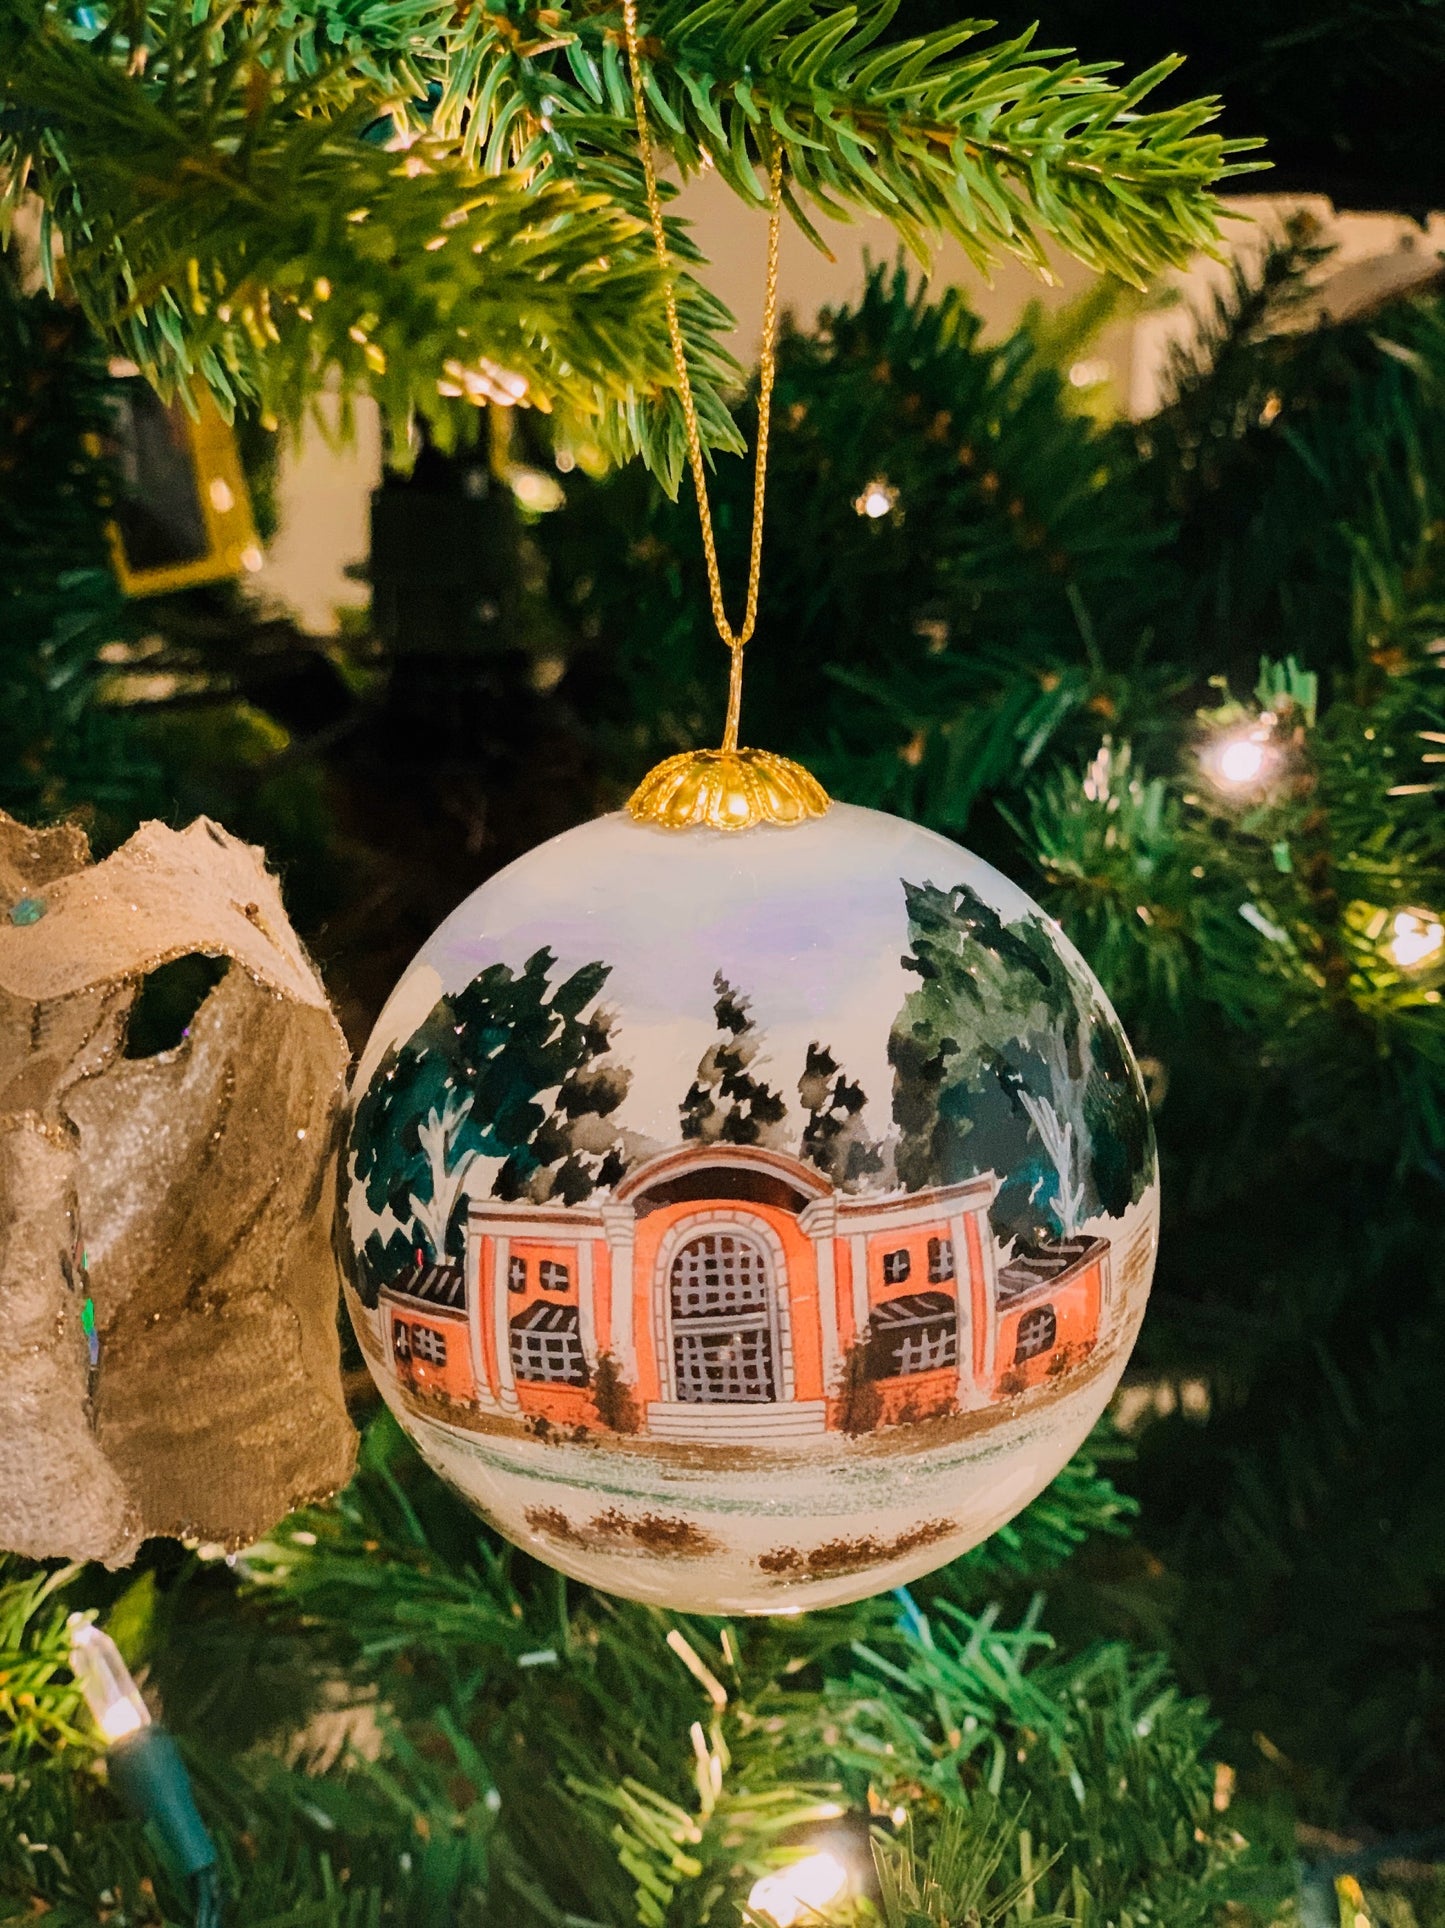 Home for the Holidays Ornament